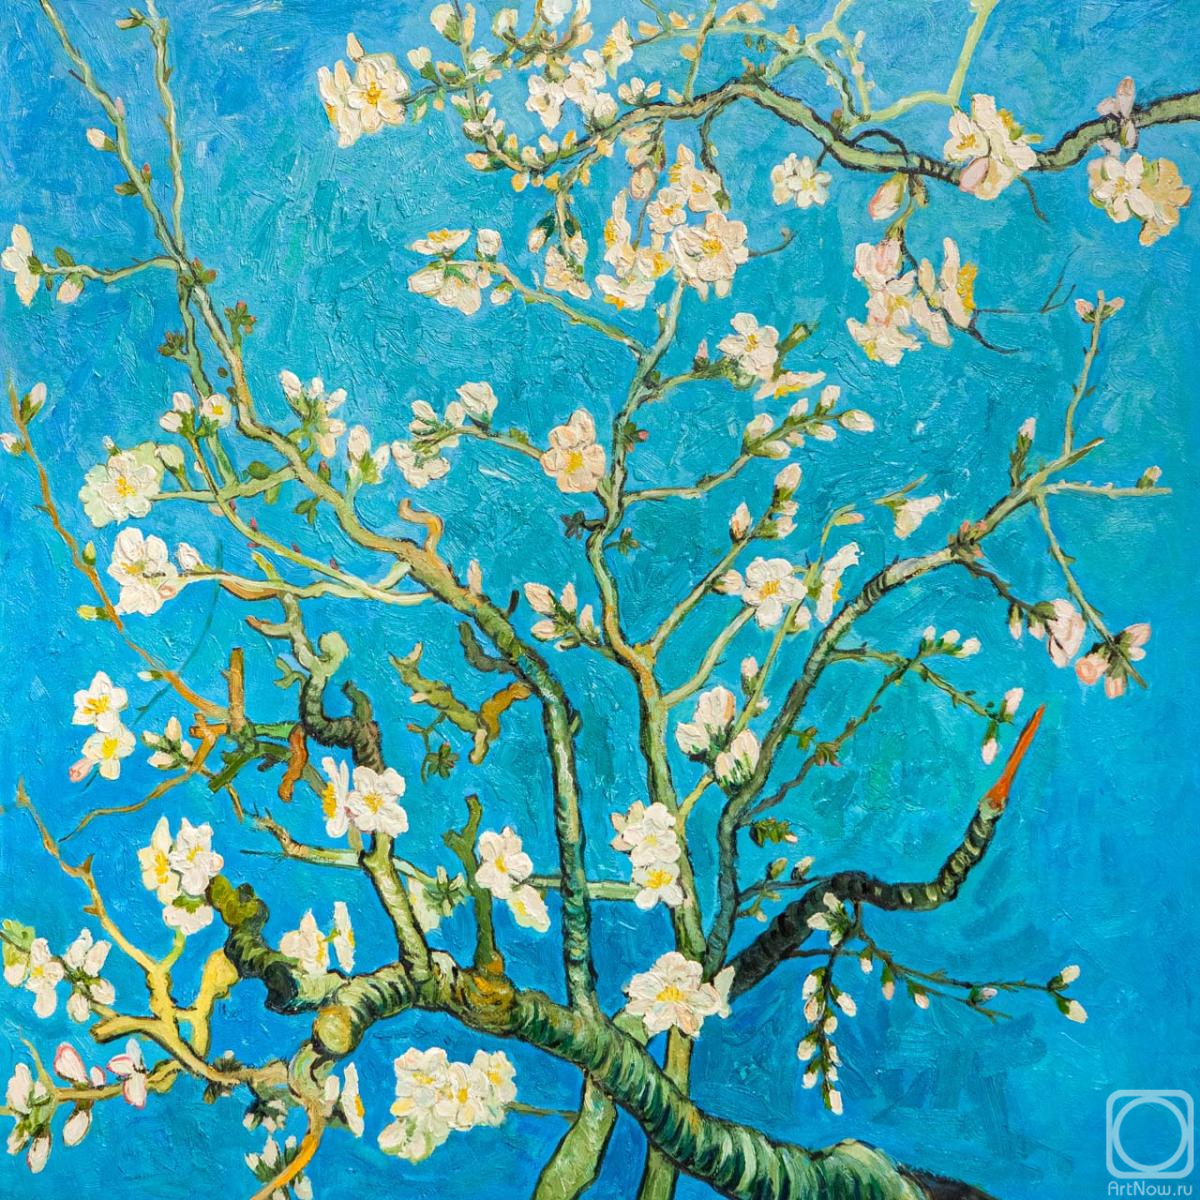 Vlodarchik Andjei. Copy of Van Gogh's painting. Branches with Almond Blossom, 1885